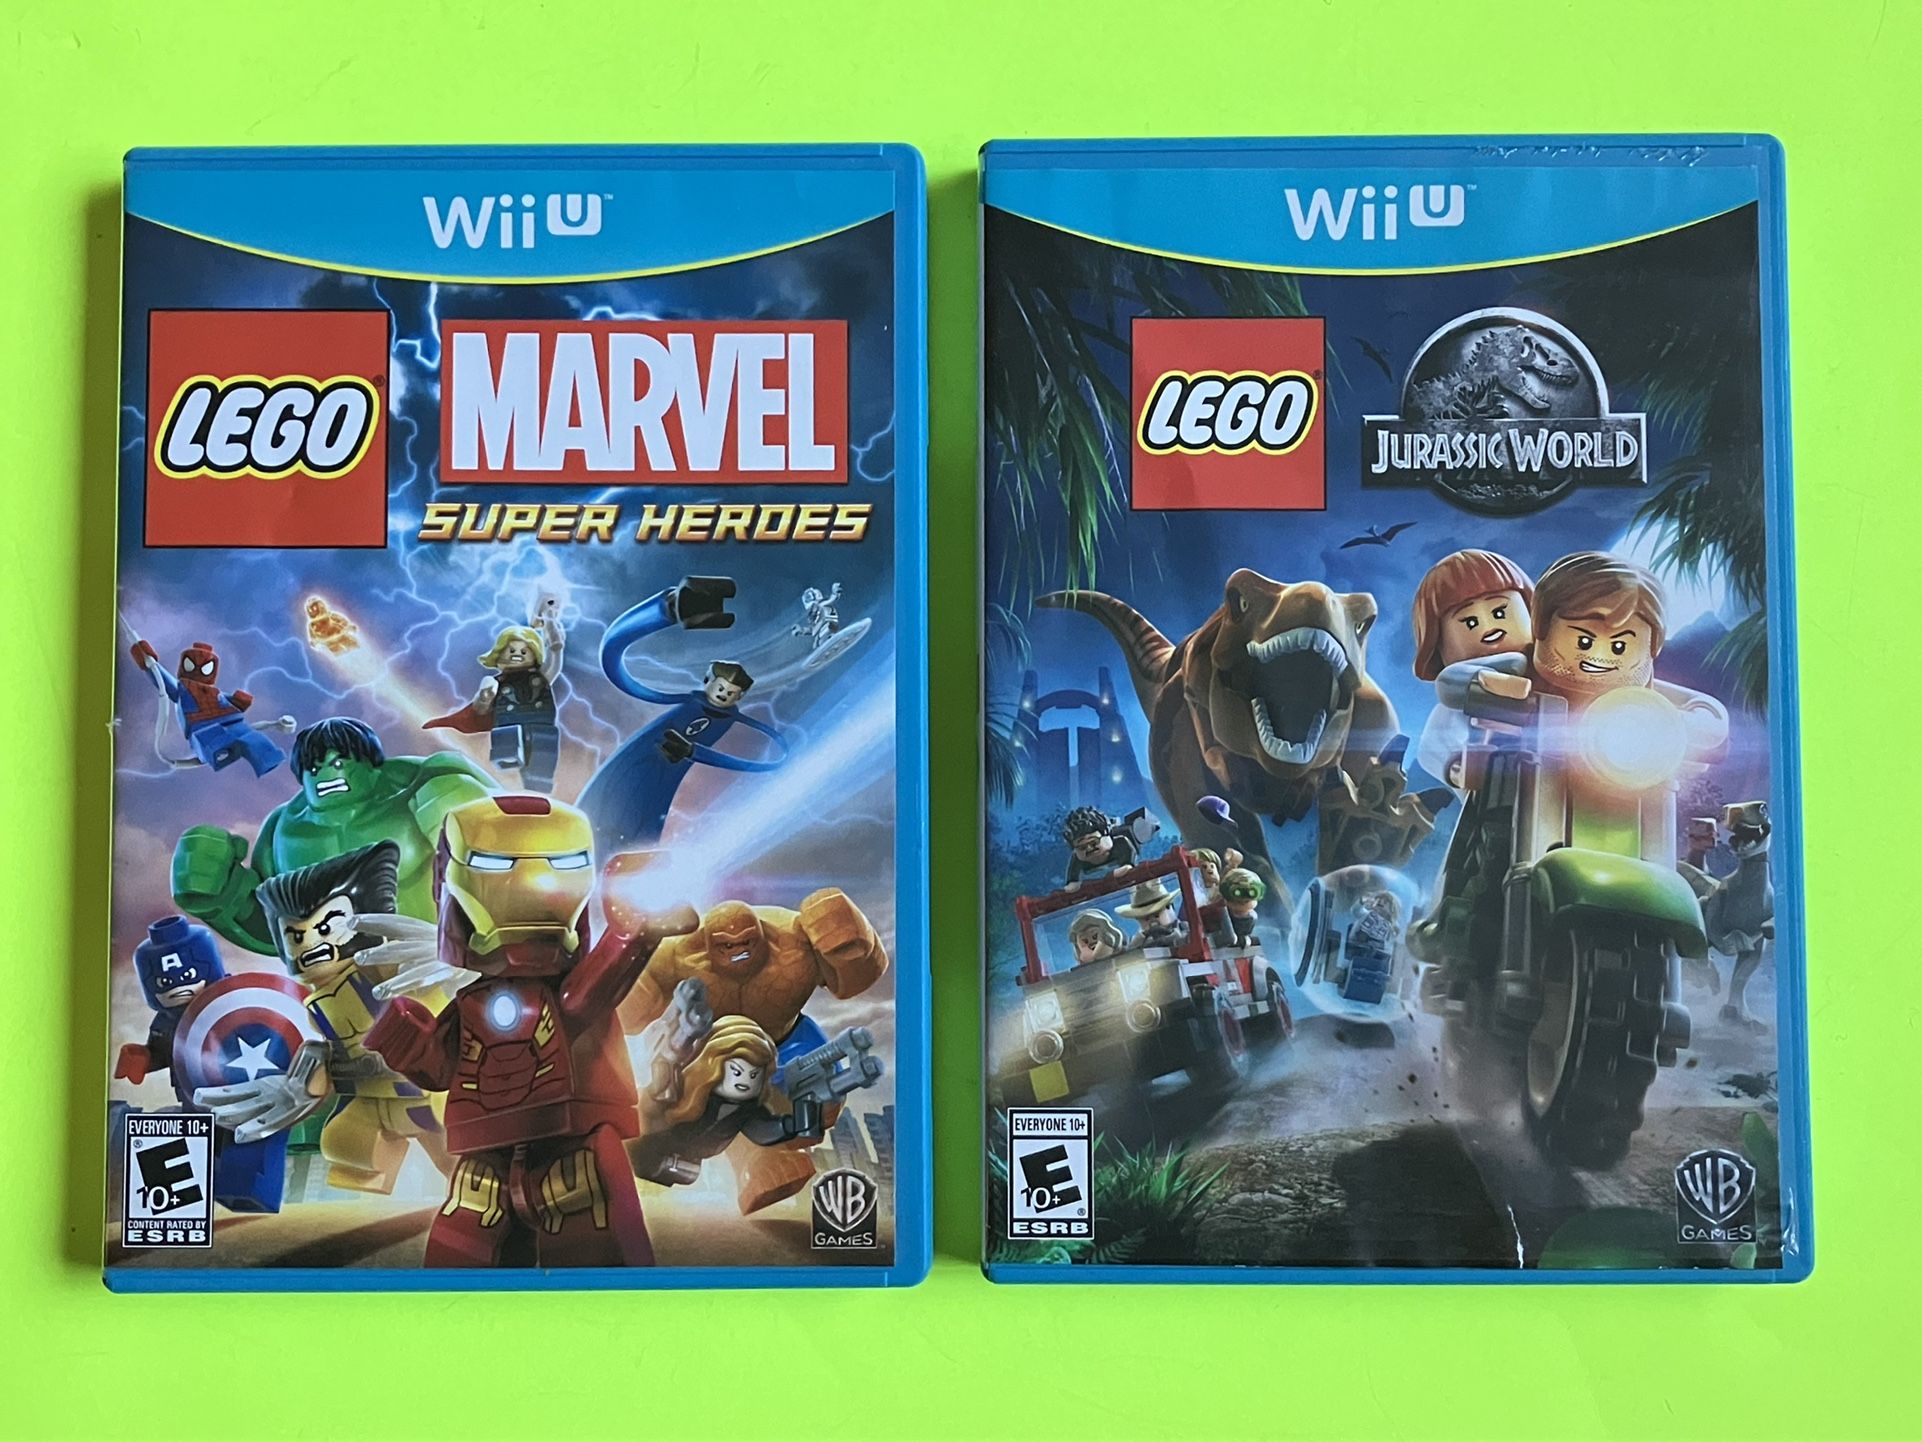 Lot 2 NINTENDO Wii U LEGO MARVEL SUPER HEROES JURASSIC WORLD  VIDEO GAME ~ DISC & CASE only ‼️ See TONS Of COOL STUFF Here ‼️ Price Is FIRM ‼️